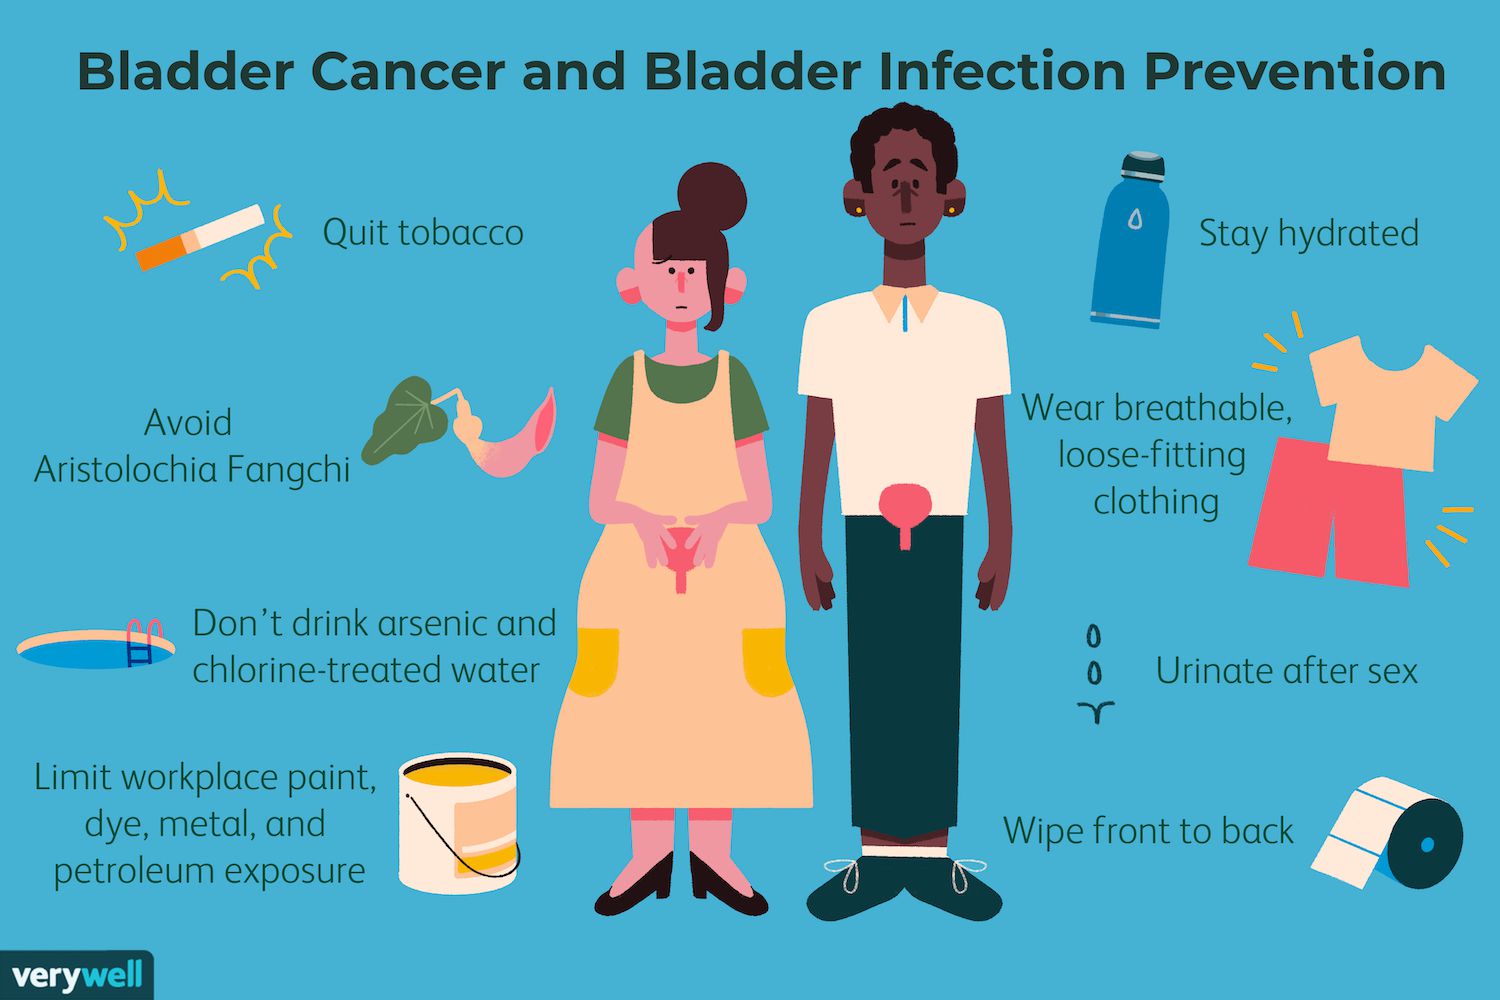 Symptoms of female bladder cancer include blood in urine, frequent urination, and pelvic pain. These signs require prompt medical attention to ensure early detection and proper treatment.